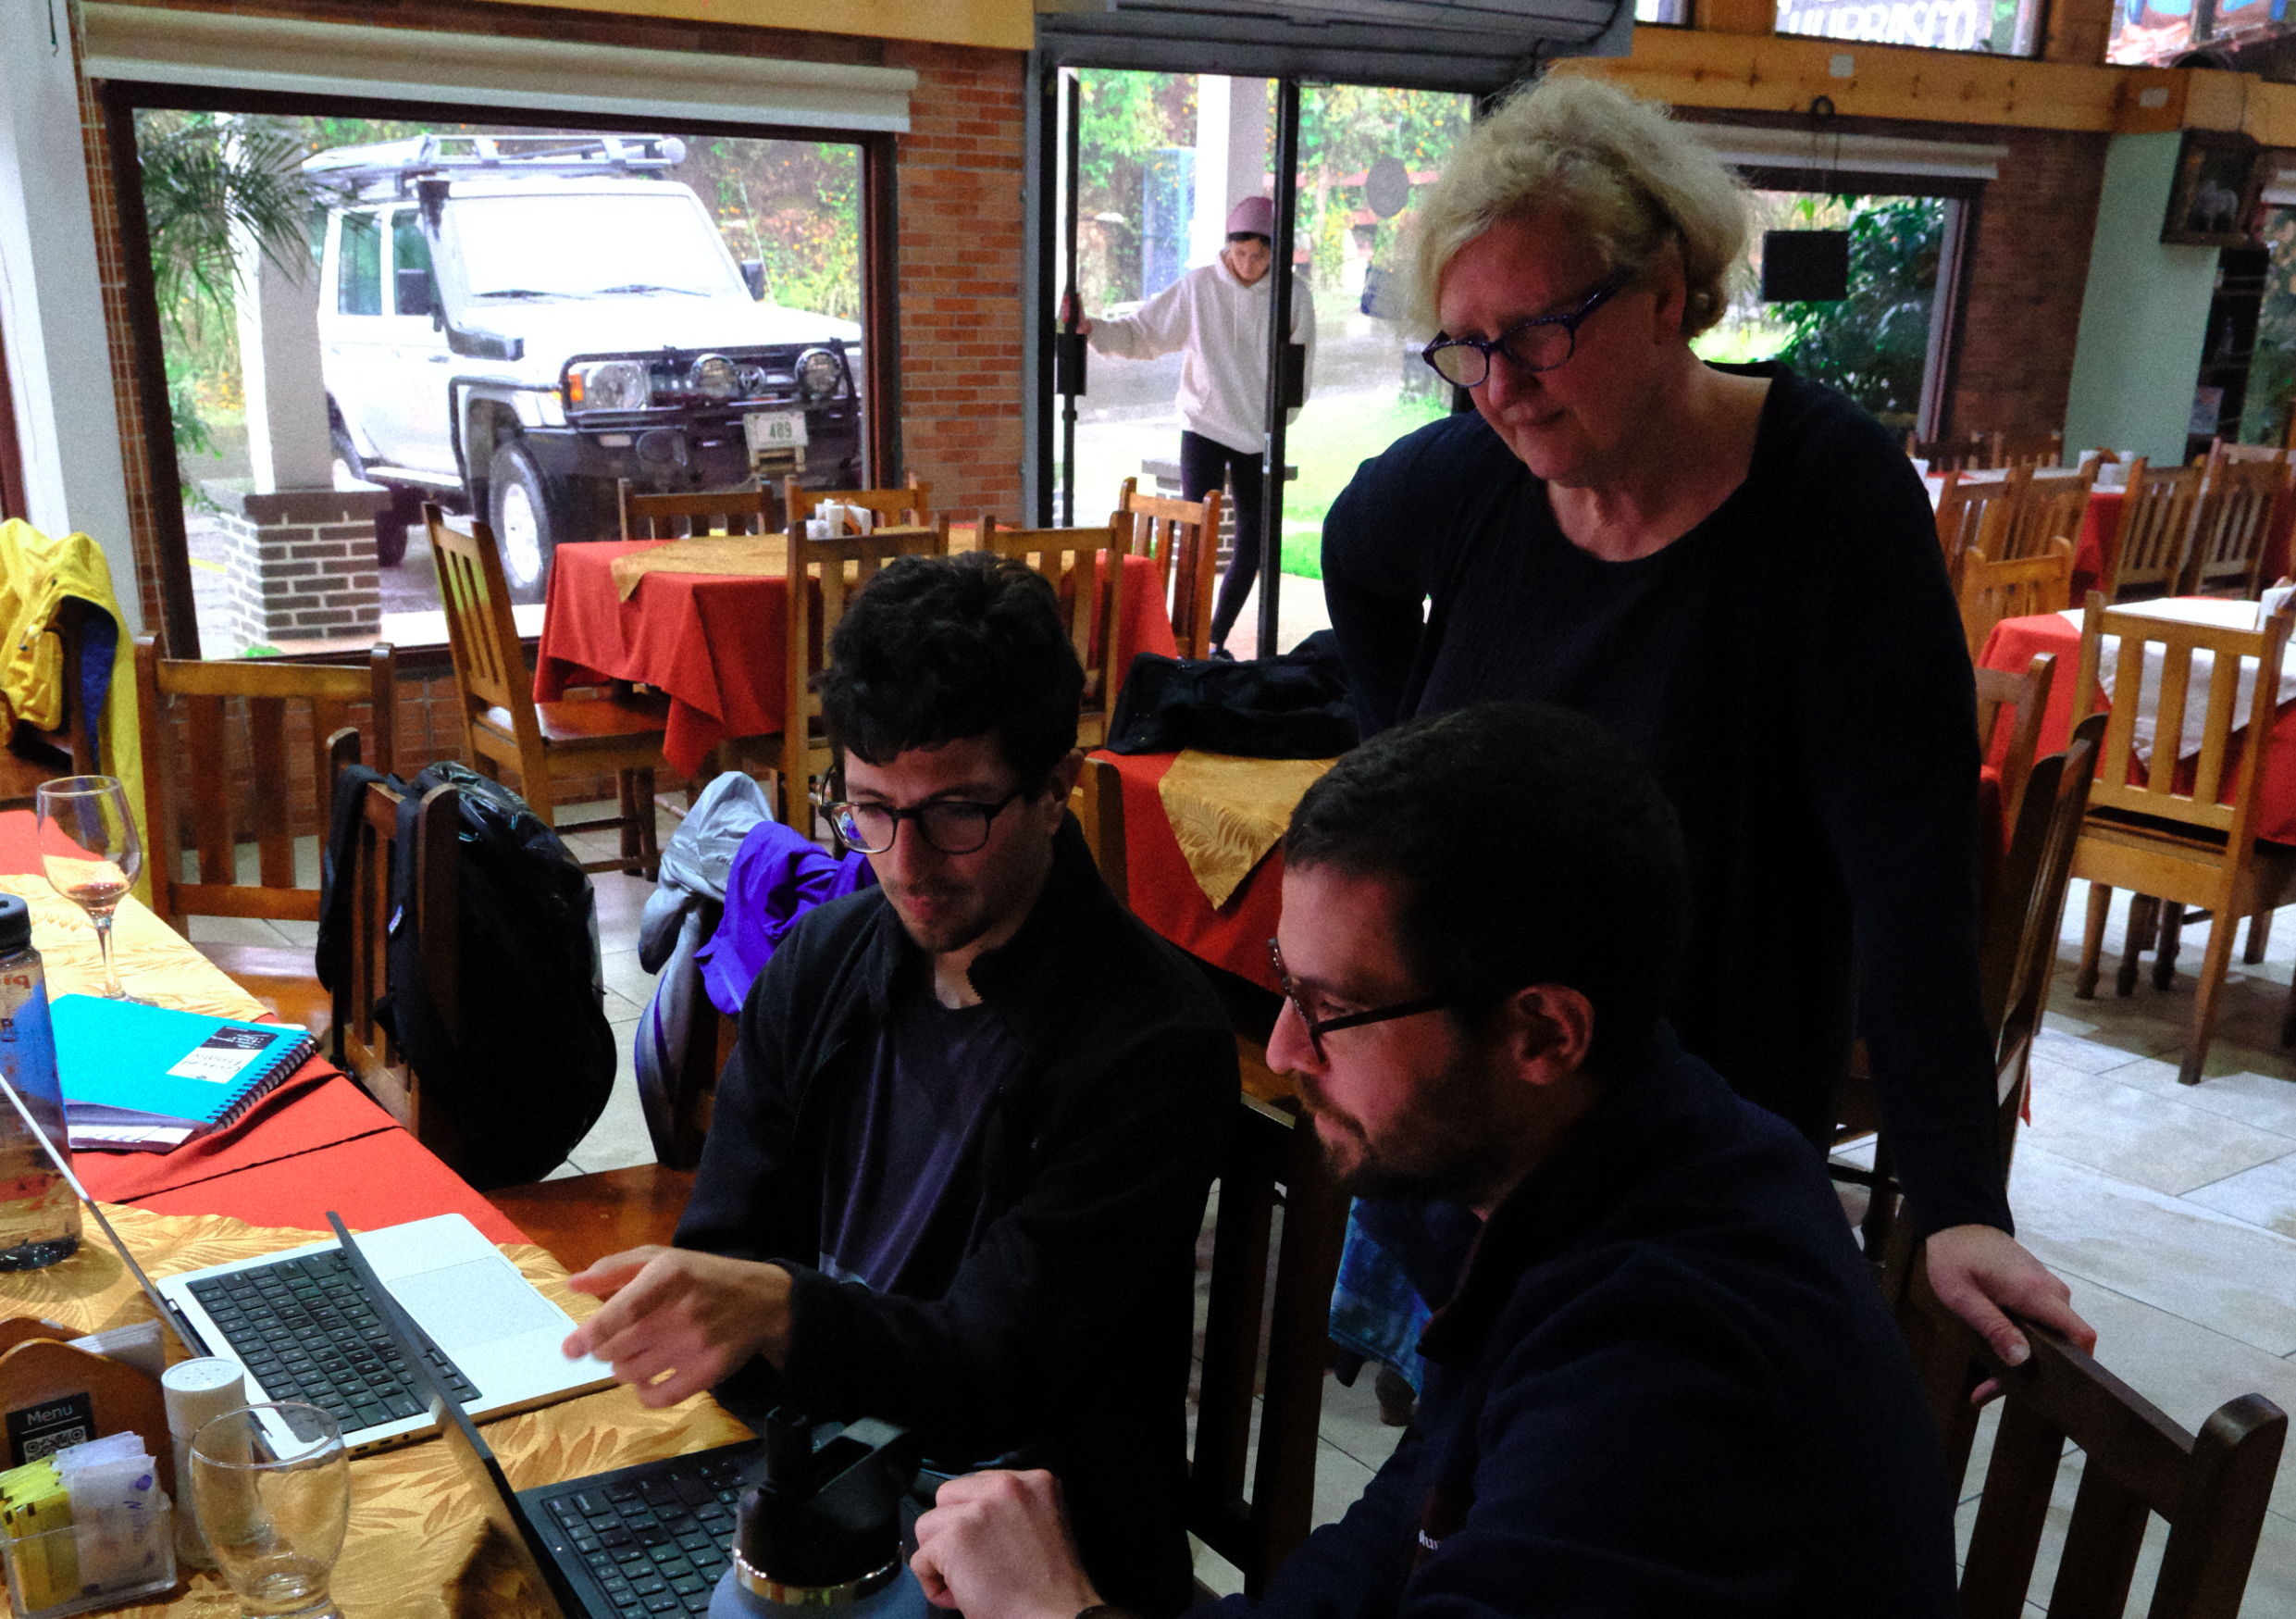 Leo van der Laat (sitting, left, OVSICORI), Terry Plank (standing, LDEO), and Corentin Caudron (sitting, right, ULB) review time series data from Poás at El Churrasco while field activities are rained out.